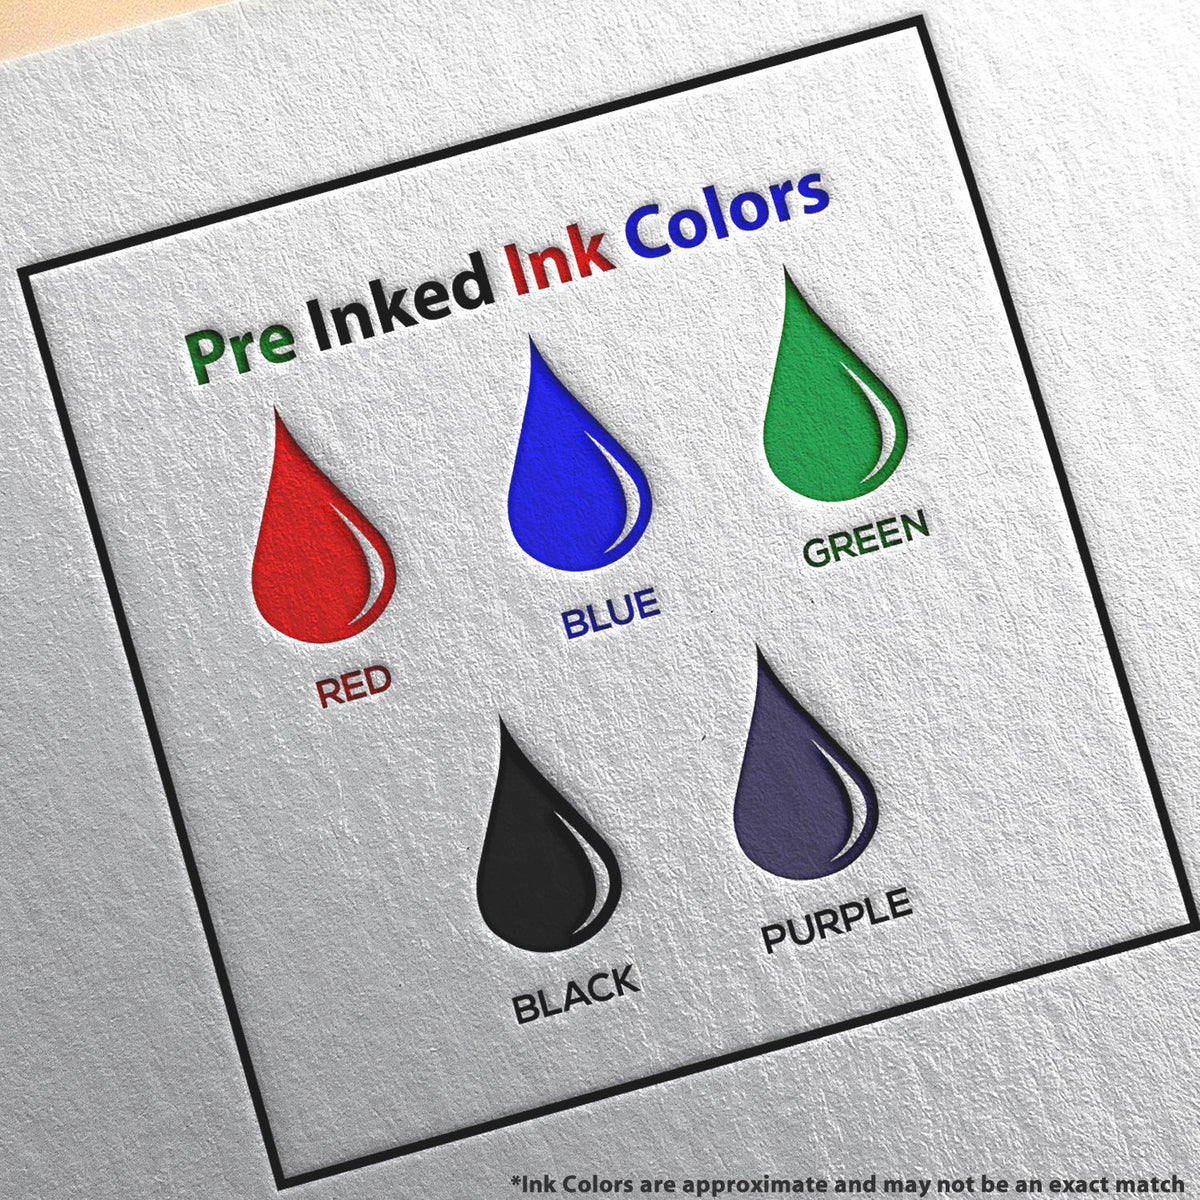 A picture showing the different ink colors or hues available for the Slim Pre-Inked Maine Land Surveyor Seal Stamp product.